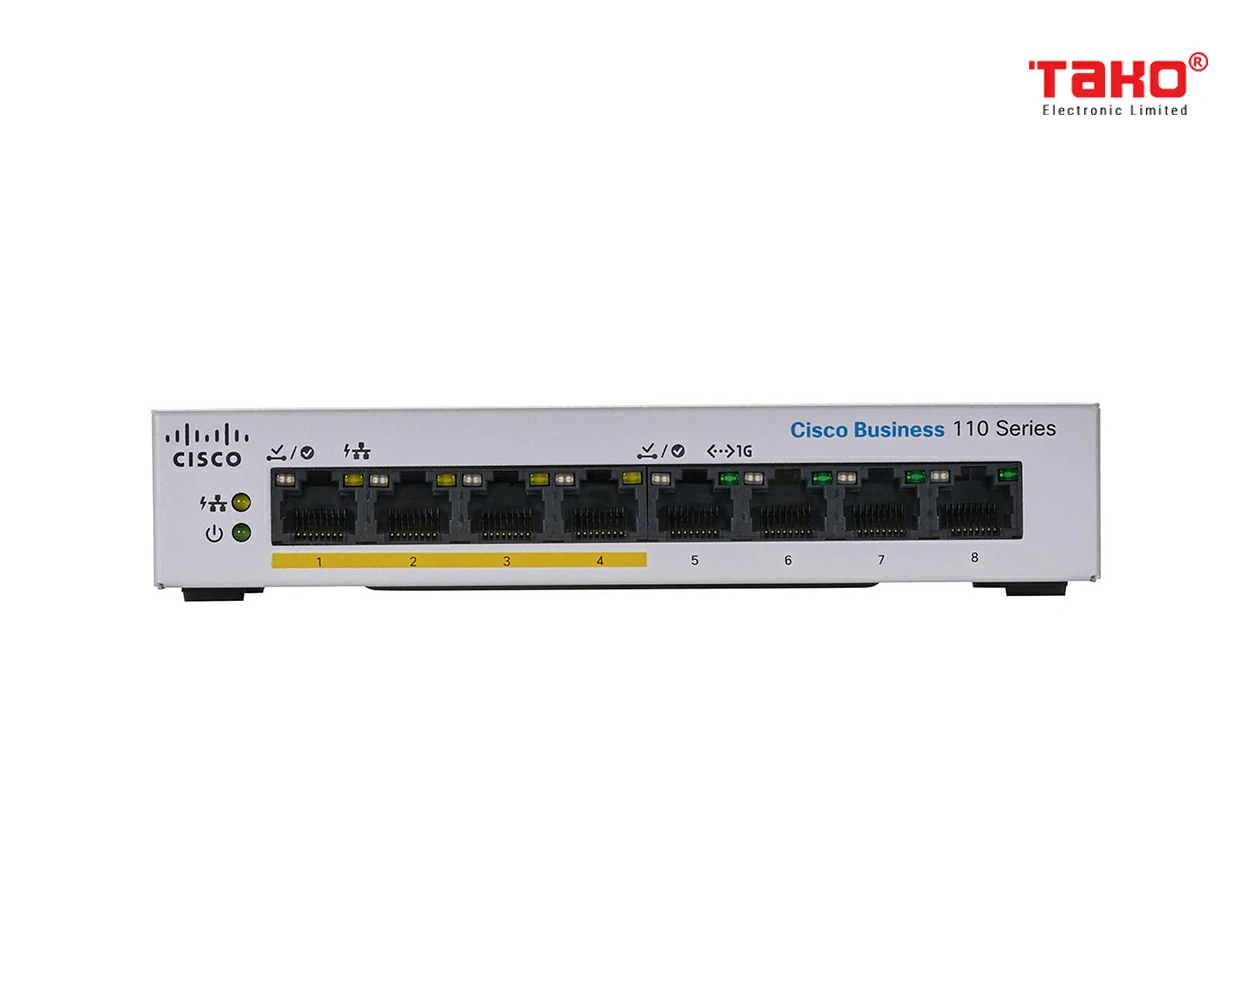 Cisco CBS110-8PP-D 8 port 10/100/1000 Mbps unmanageable switch, 4 of which are PoE 3